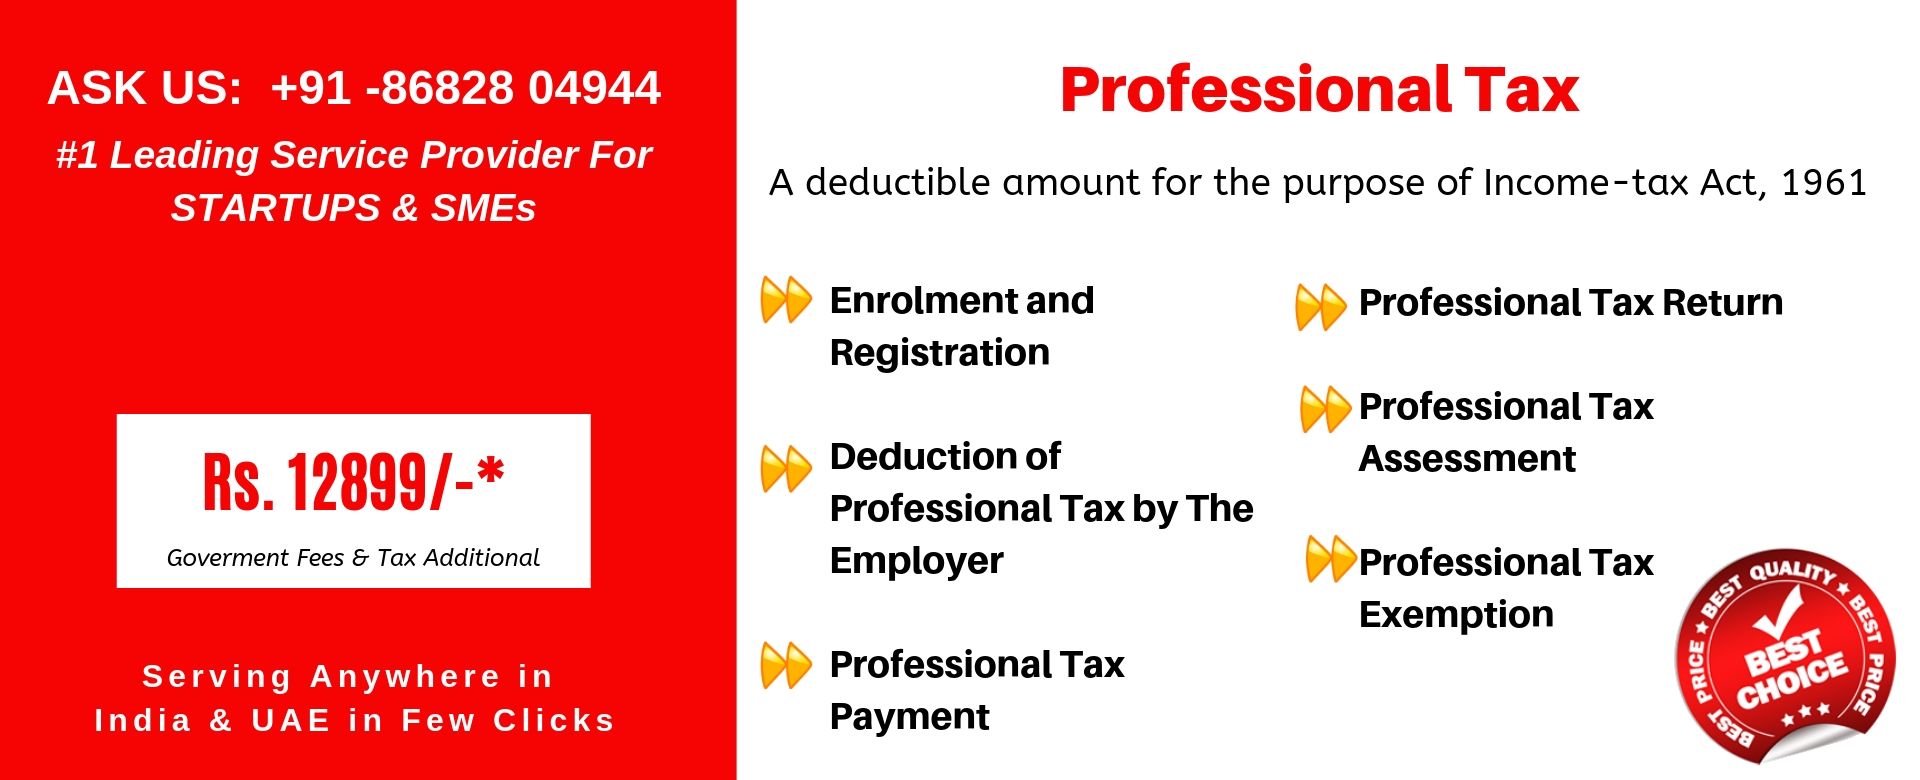 professional tax in india